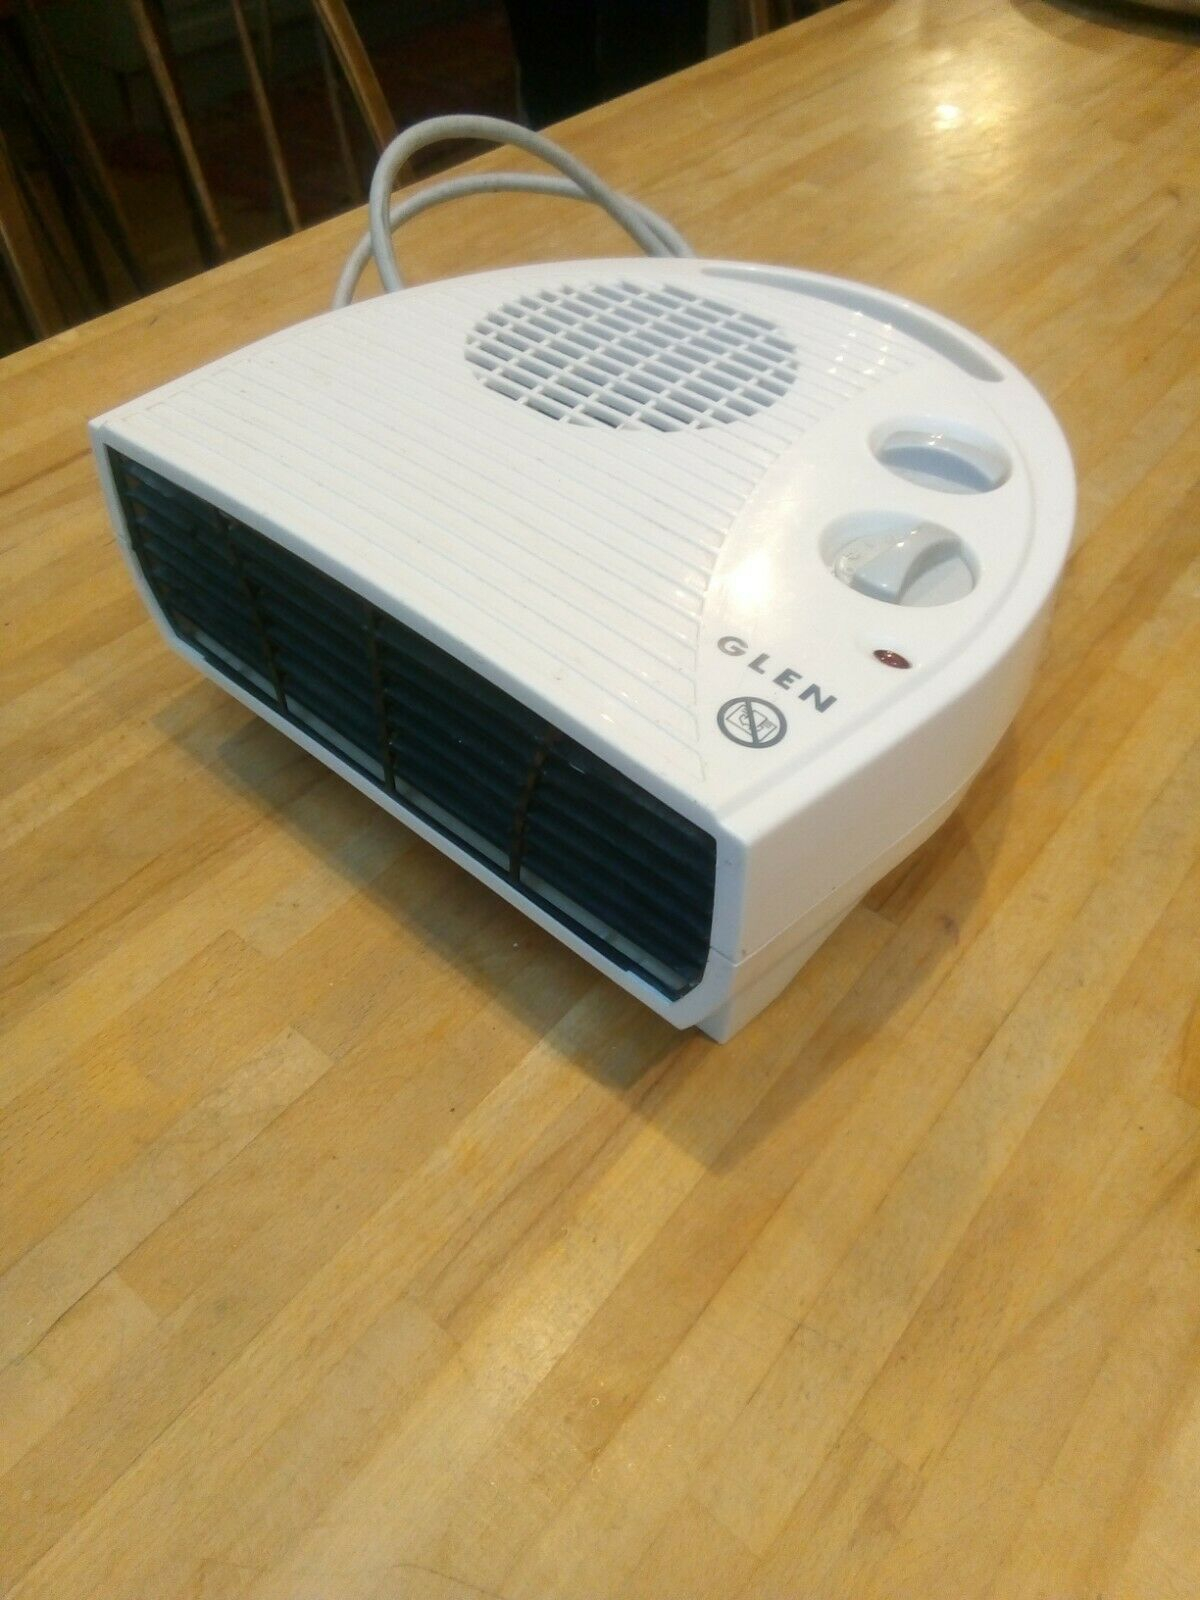 Glen Dimplex Gf30tsn 3kw Portable Flat Thermostat Electric Fan Heater intended for sizing 1200 X 1600